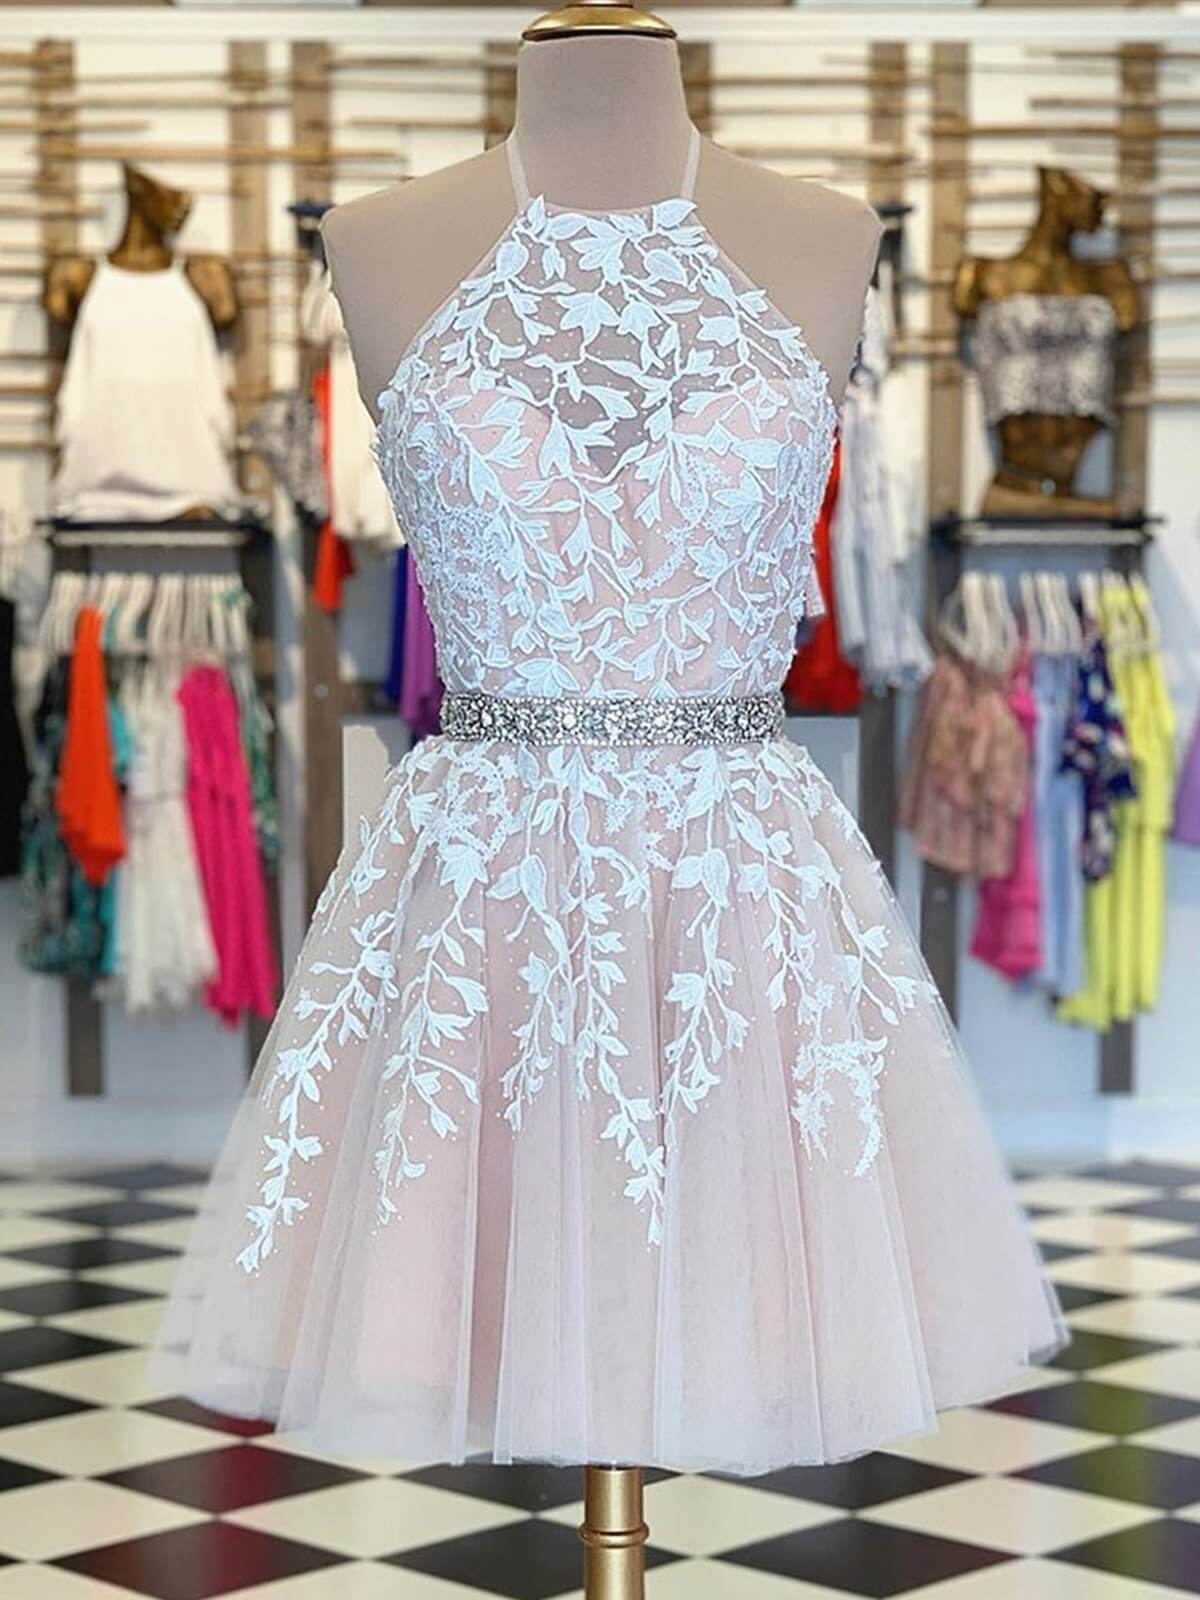 A Line Halter Neck Short Champagne Lace Prom Dresses For Black girls For Women,Lace Formal Homecoming Dress